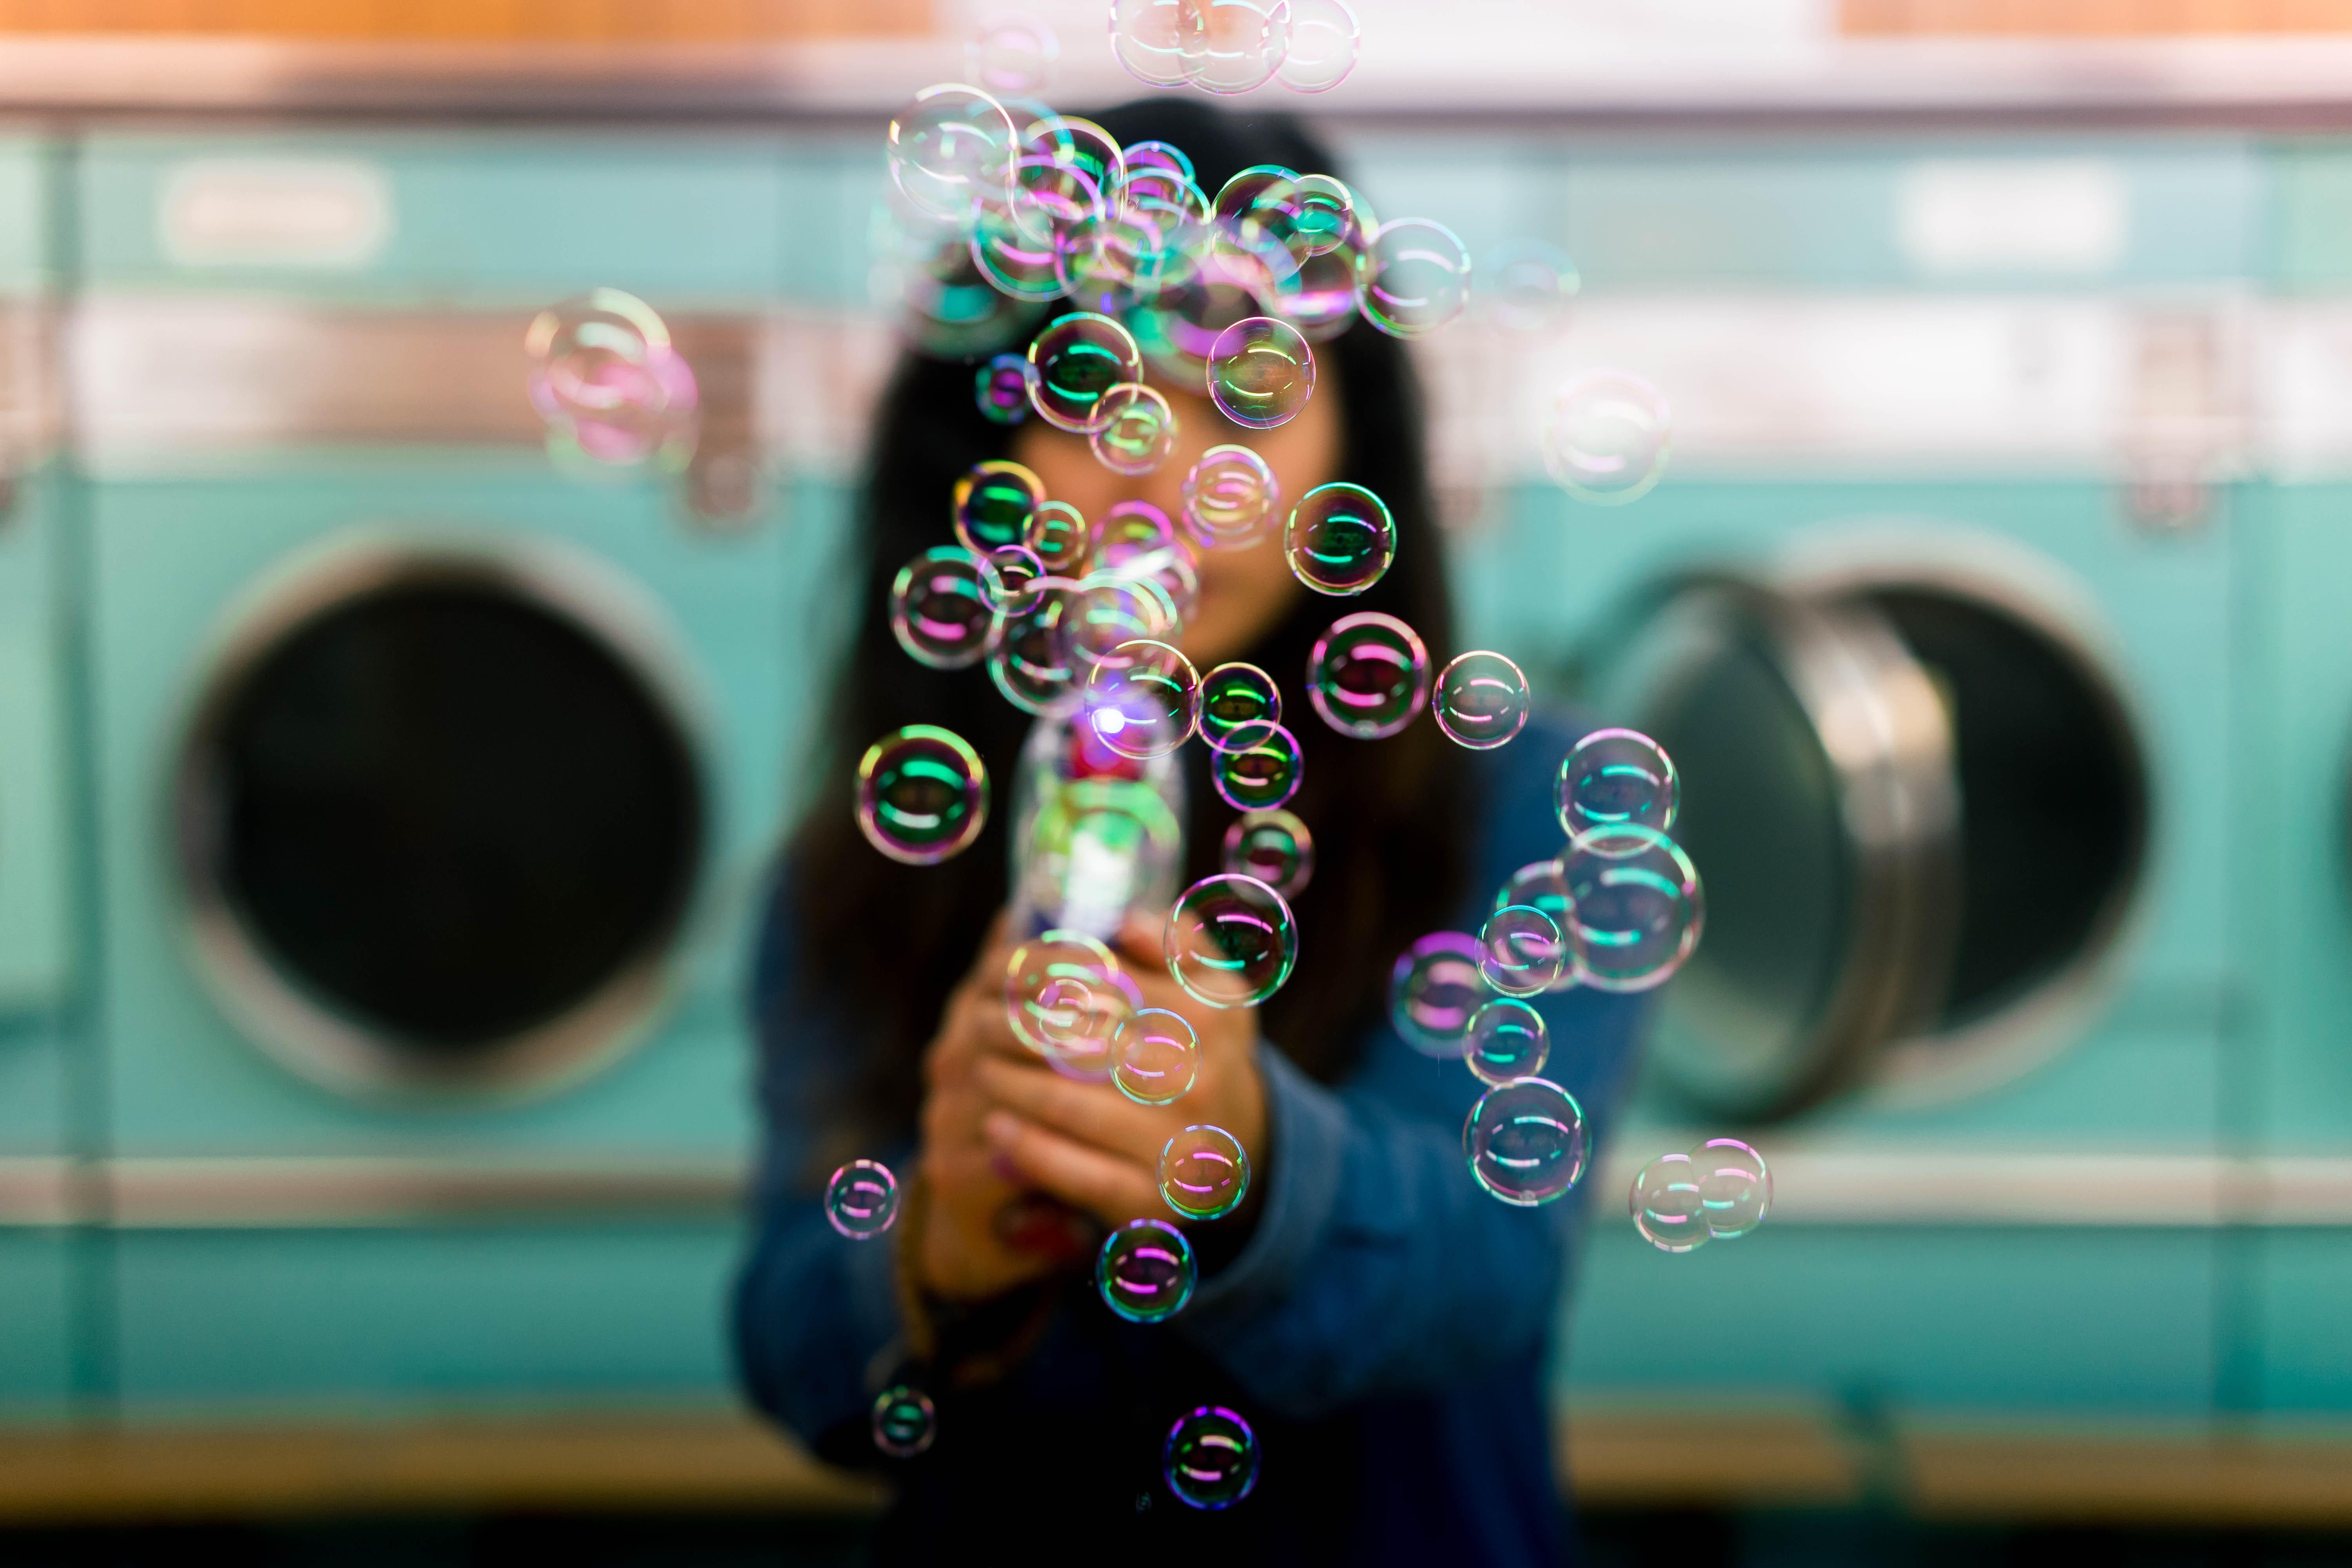 How to fix a smelly washing machine